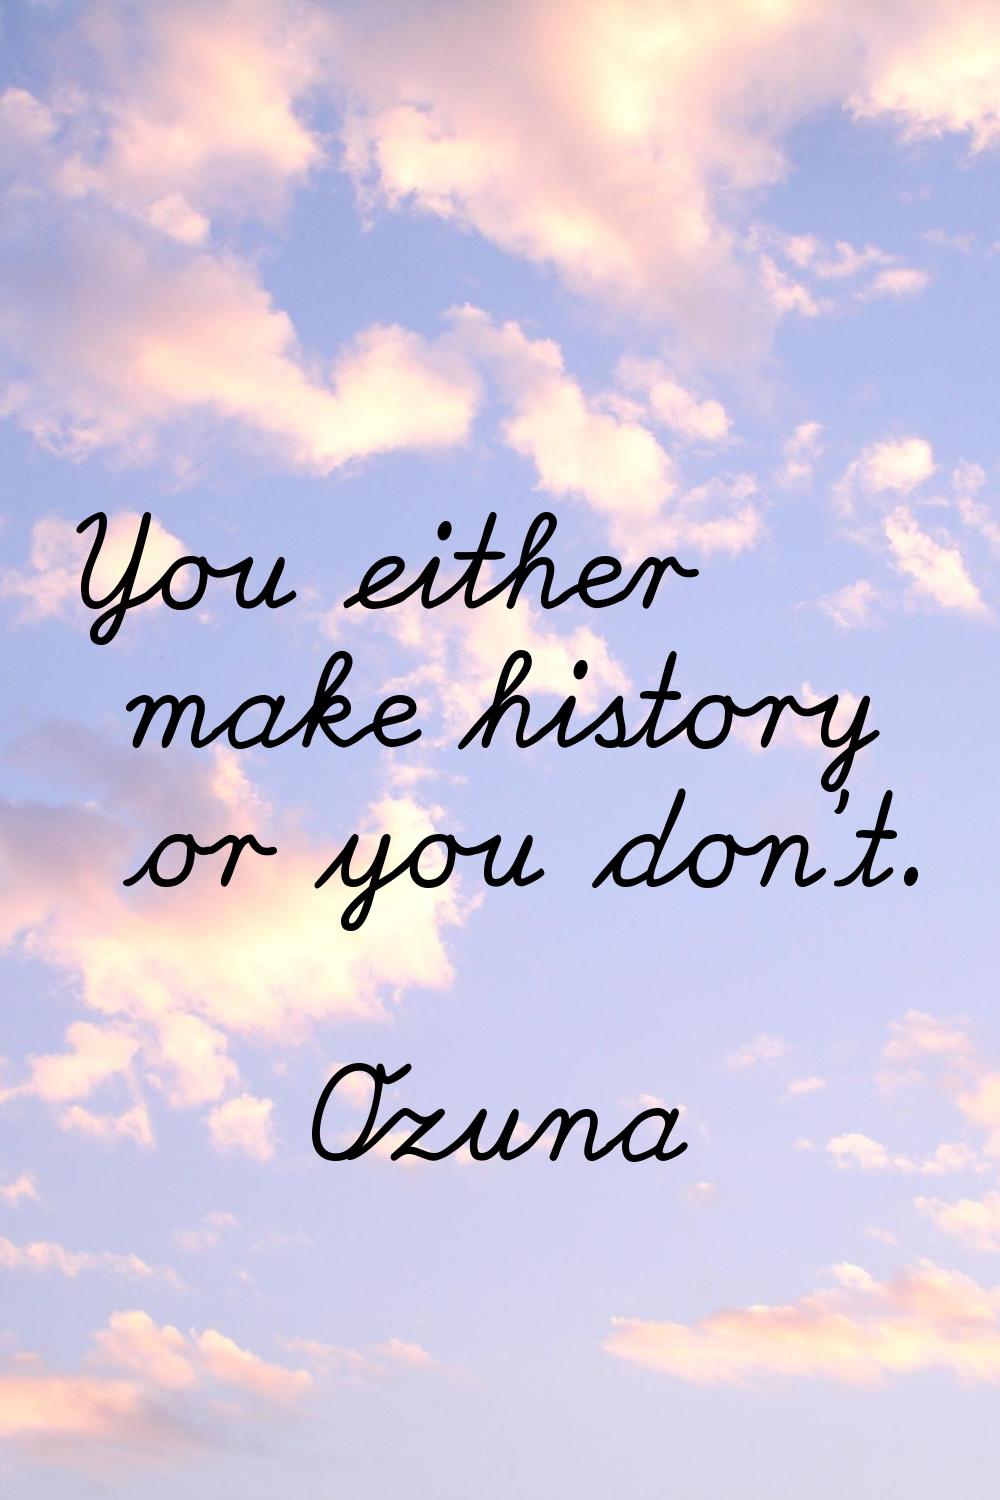 You either make history or you don't.